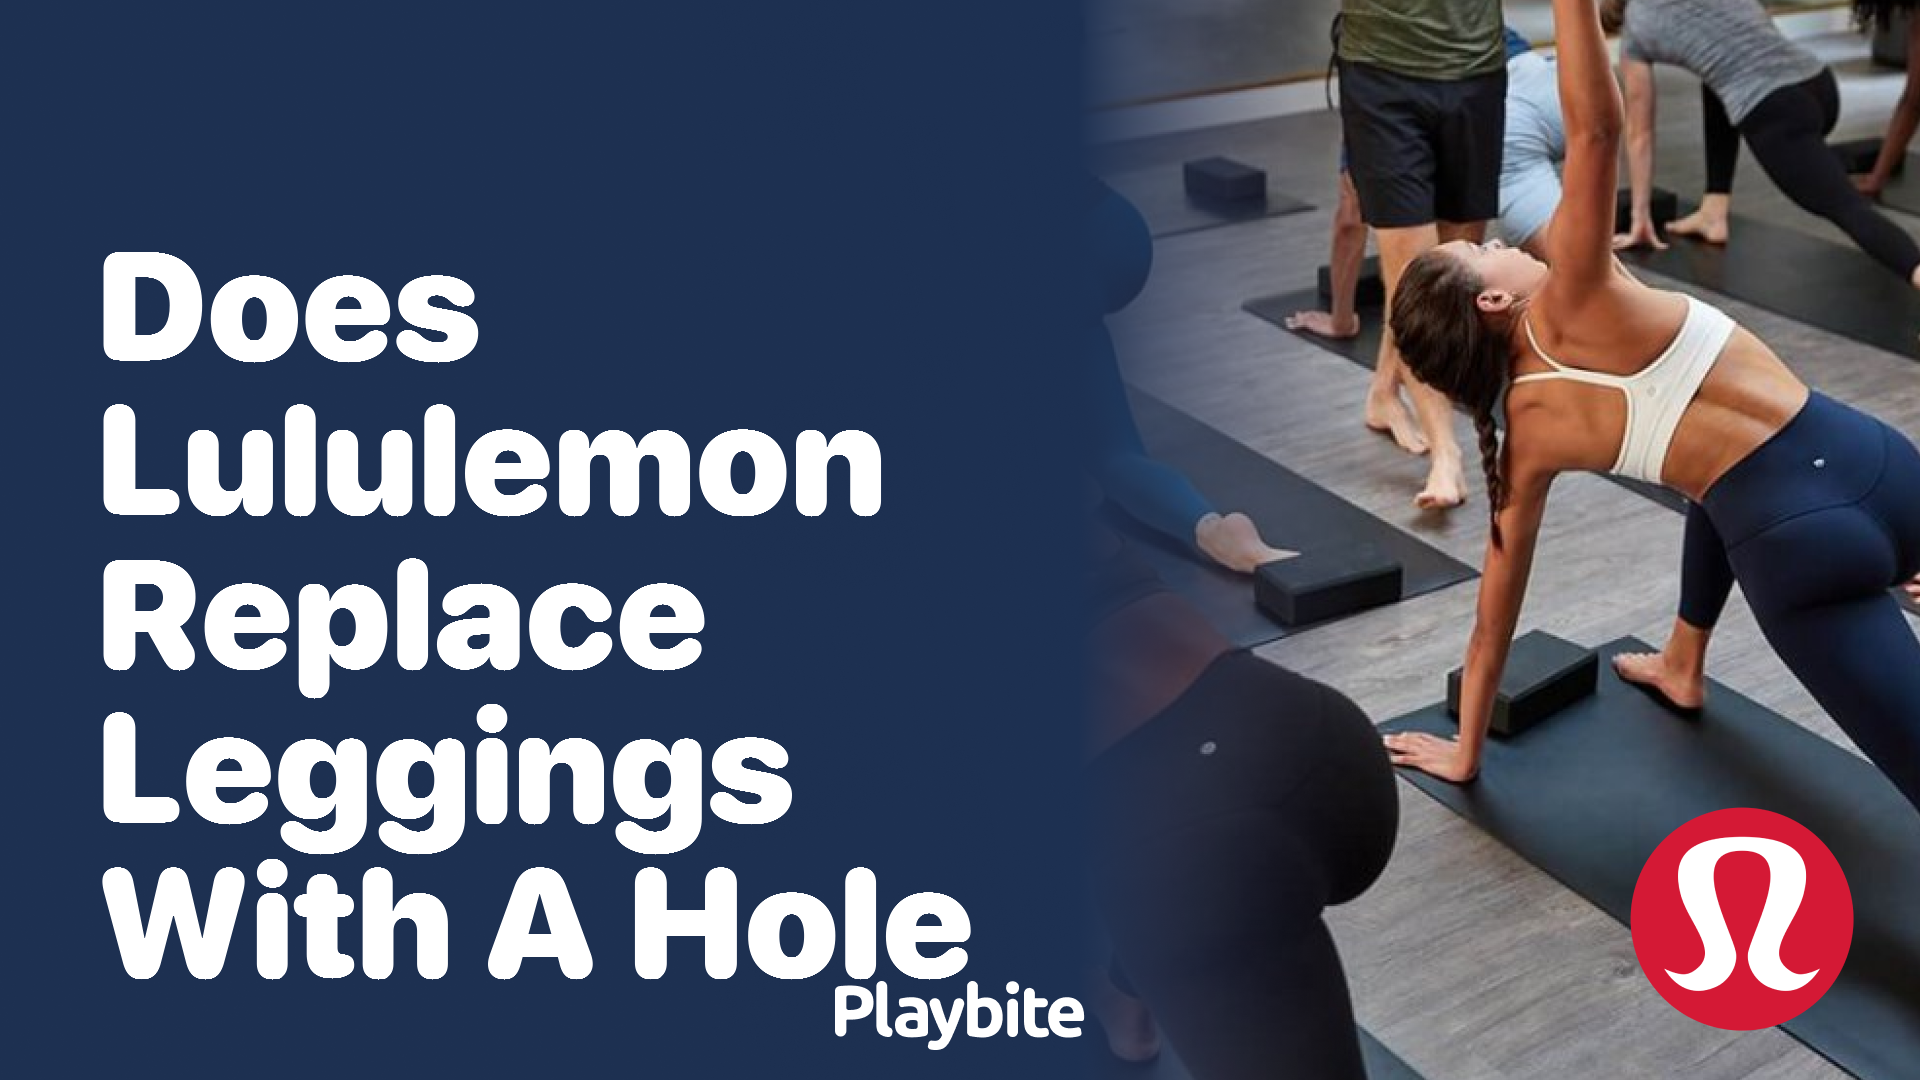 Does Lululemon Replace Leggings With a Hole? - Playbite